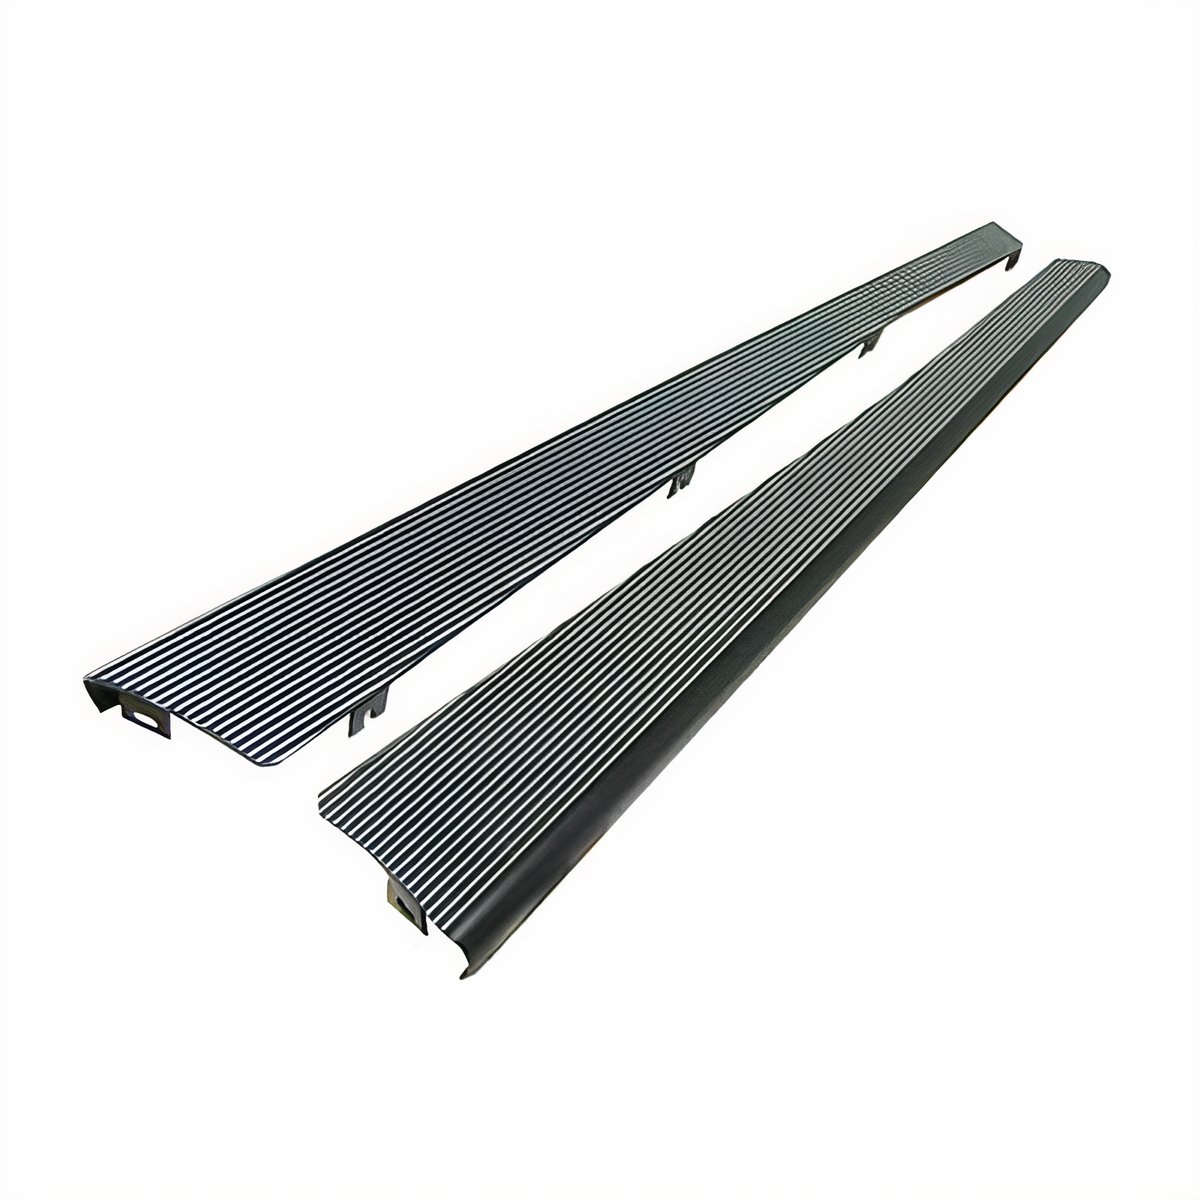 VW Running Boards - Billet Aluminum - Satin Black With Polished Ribs - Made in USA - Pair